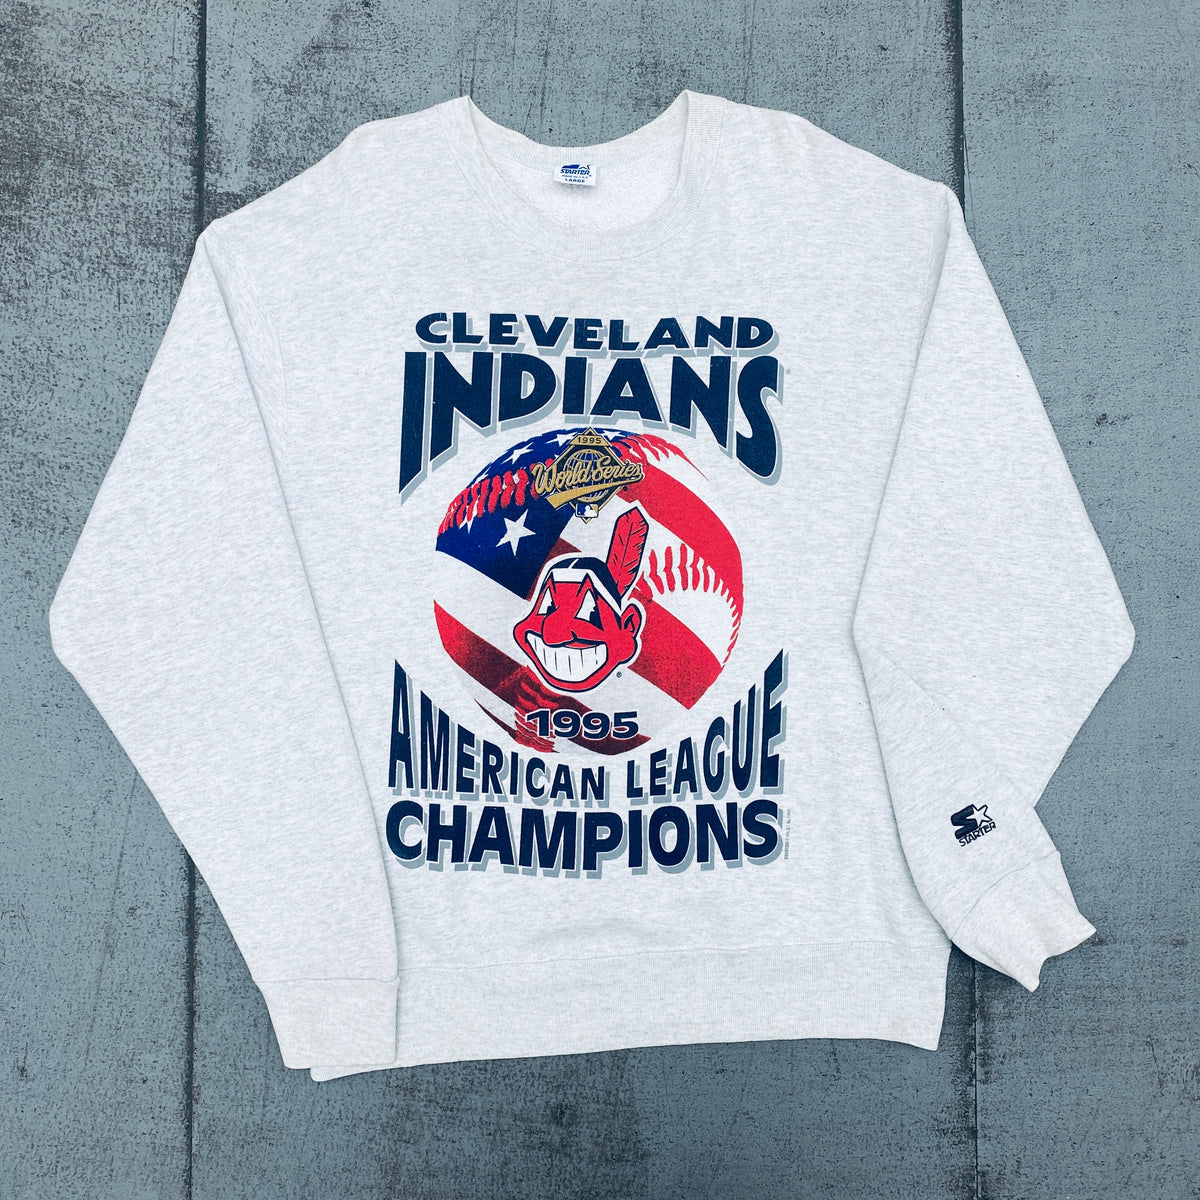 The 1995 Cleveland Indians